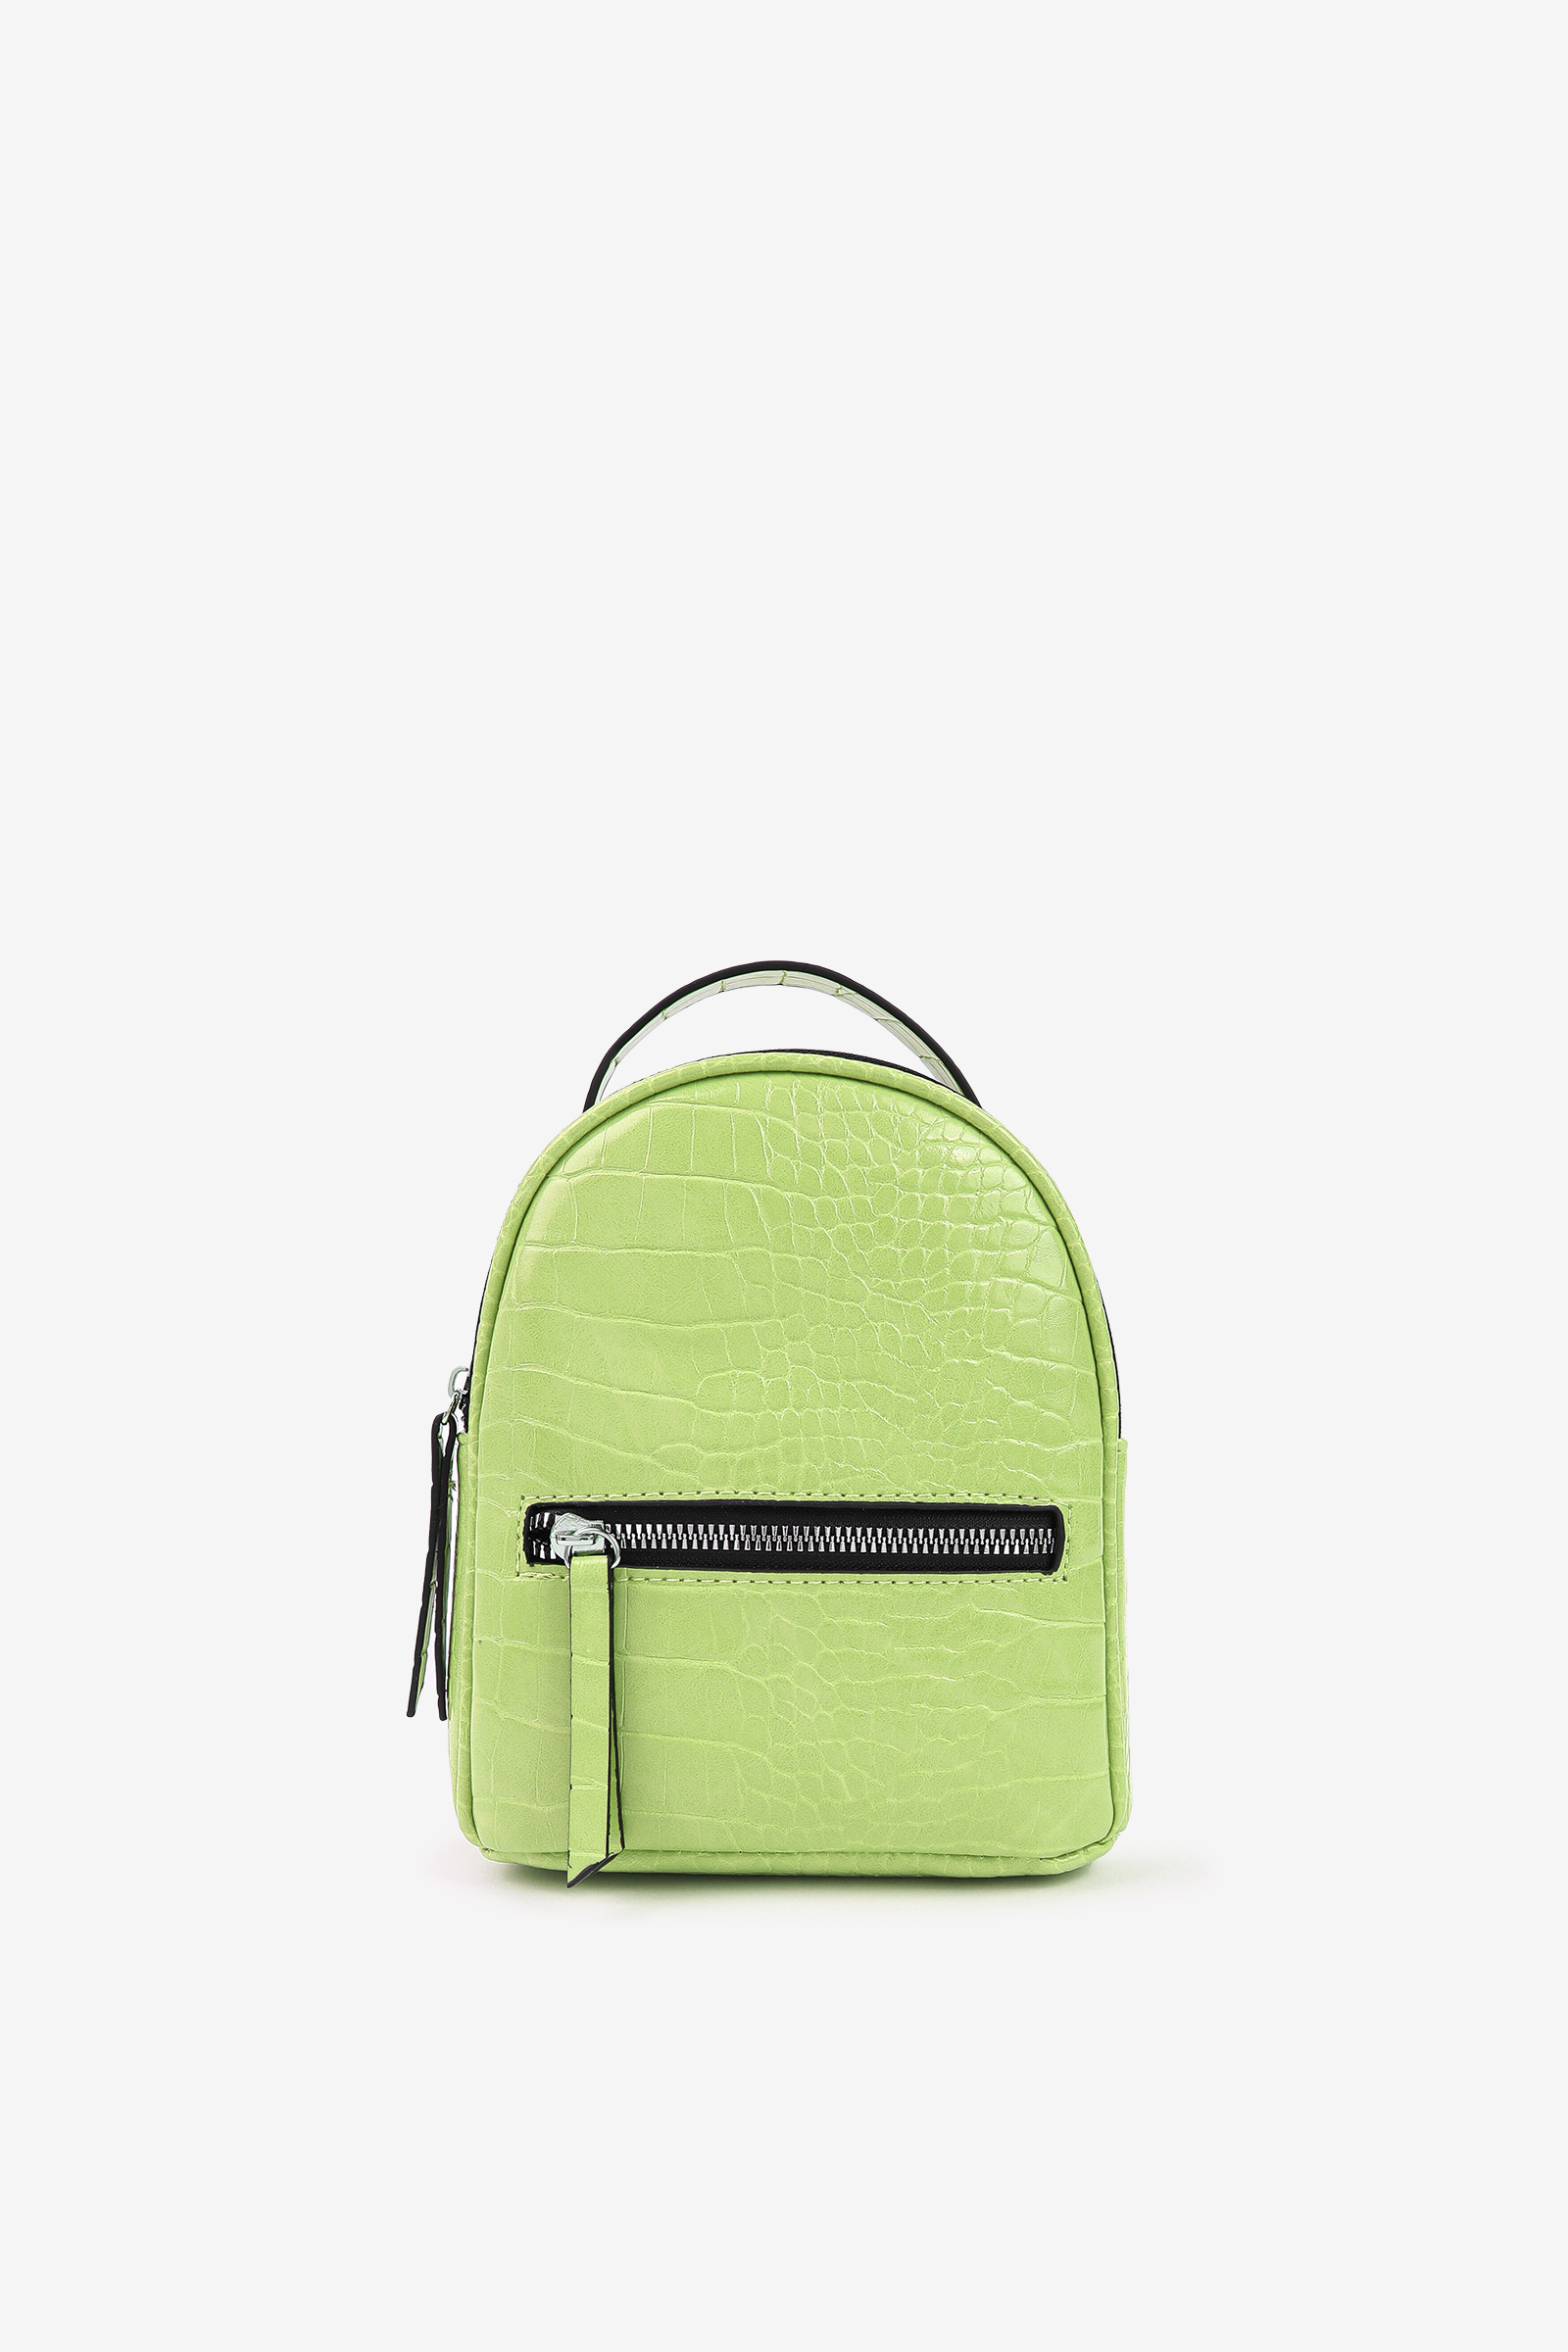 Ardene Croc Embossed Mini Backpack in Light Green | Faux Leather/Polyester